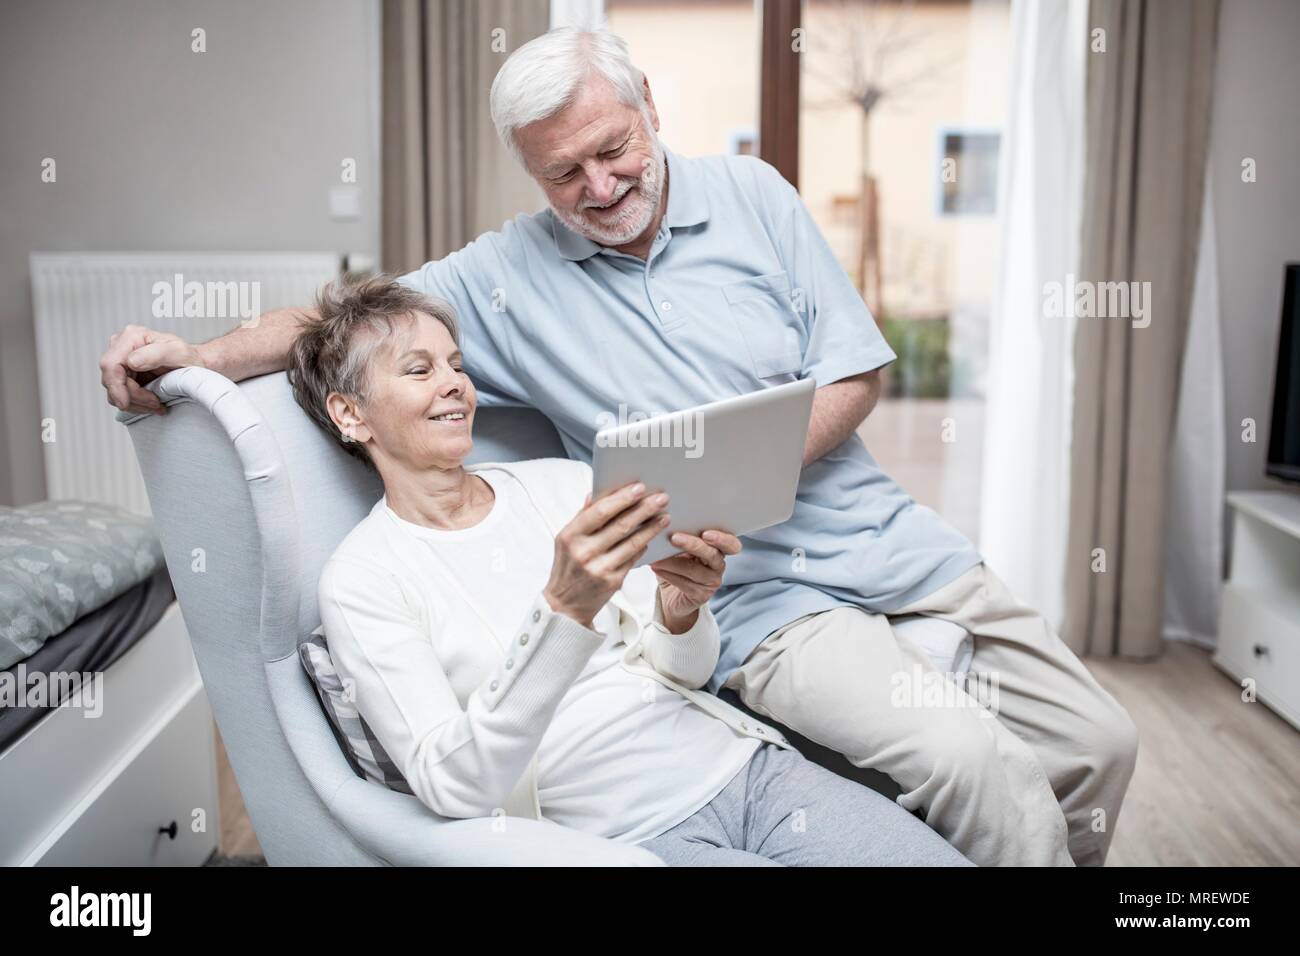 Senior couple in hospital room looking at digital tablet. Stock Photo